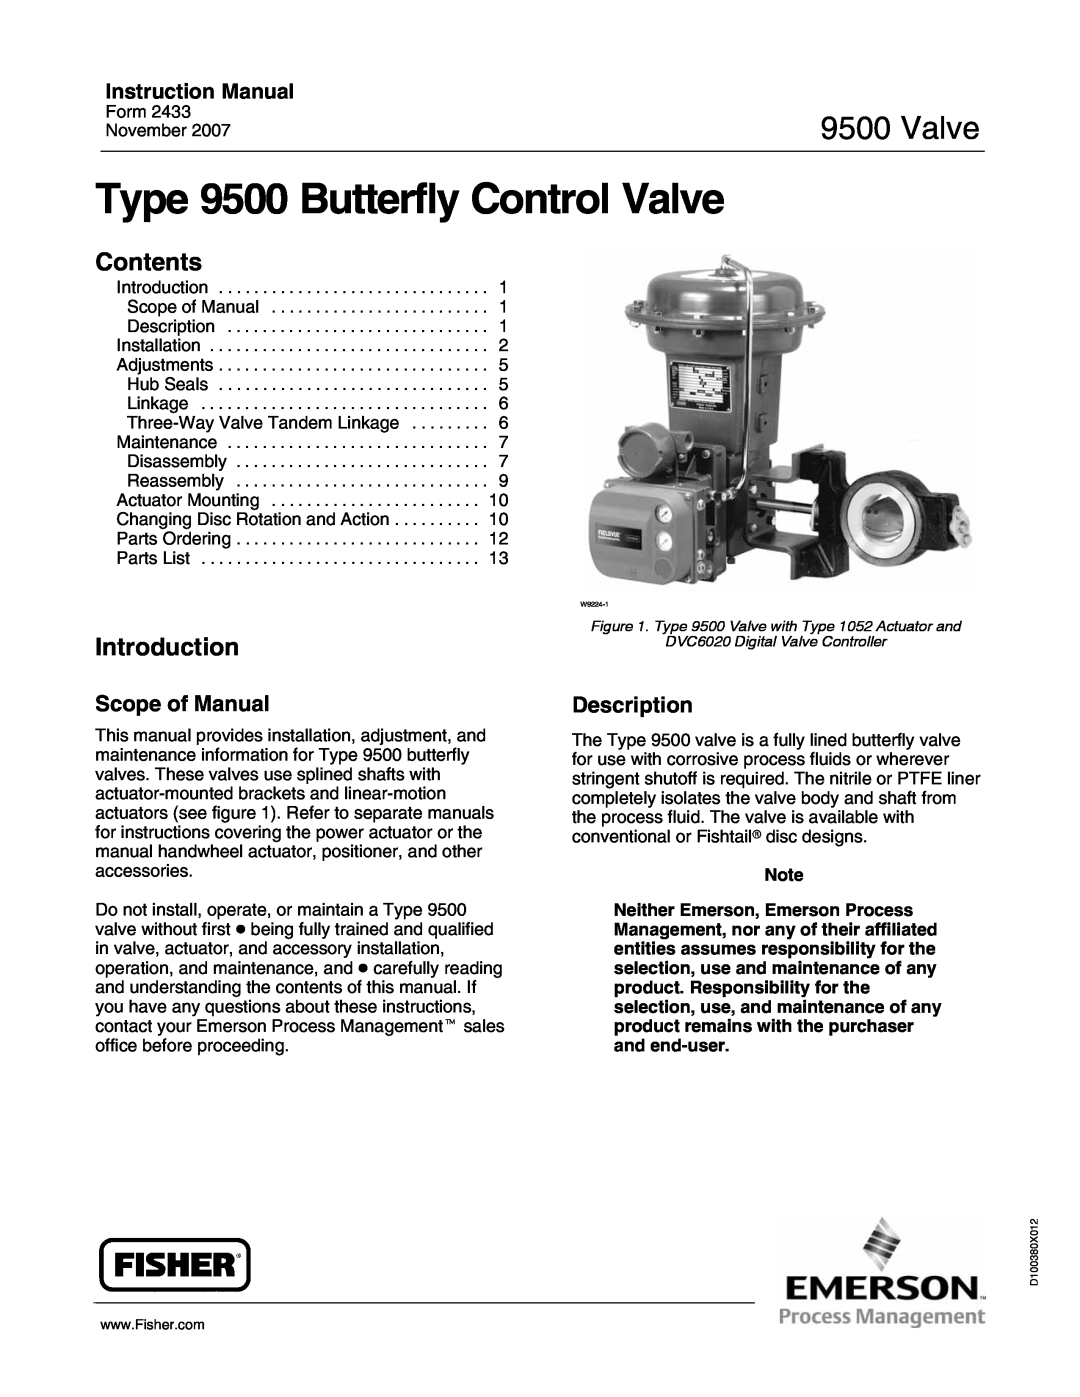 Fisher 9500 instruction manual Valve, Contents, Introduction, Scope of Manual, Description, Instruction Manual 